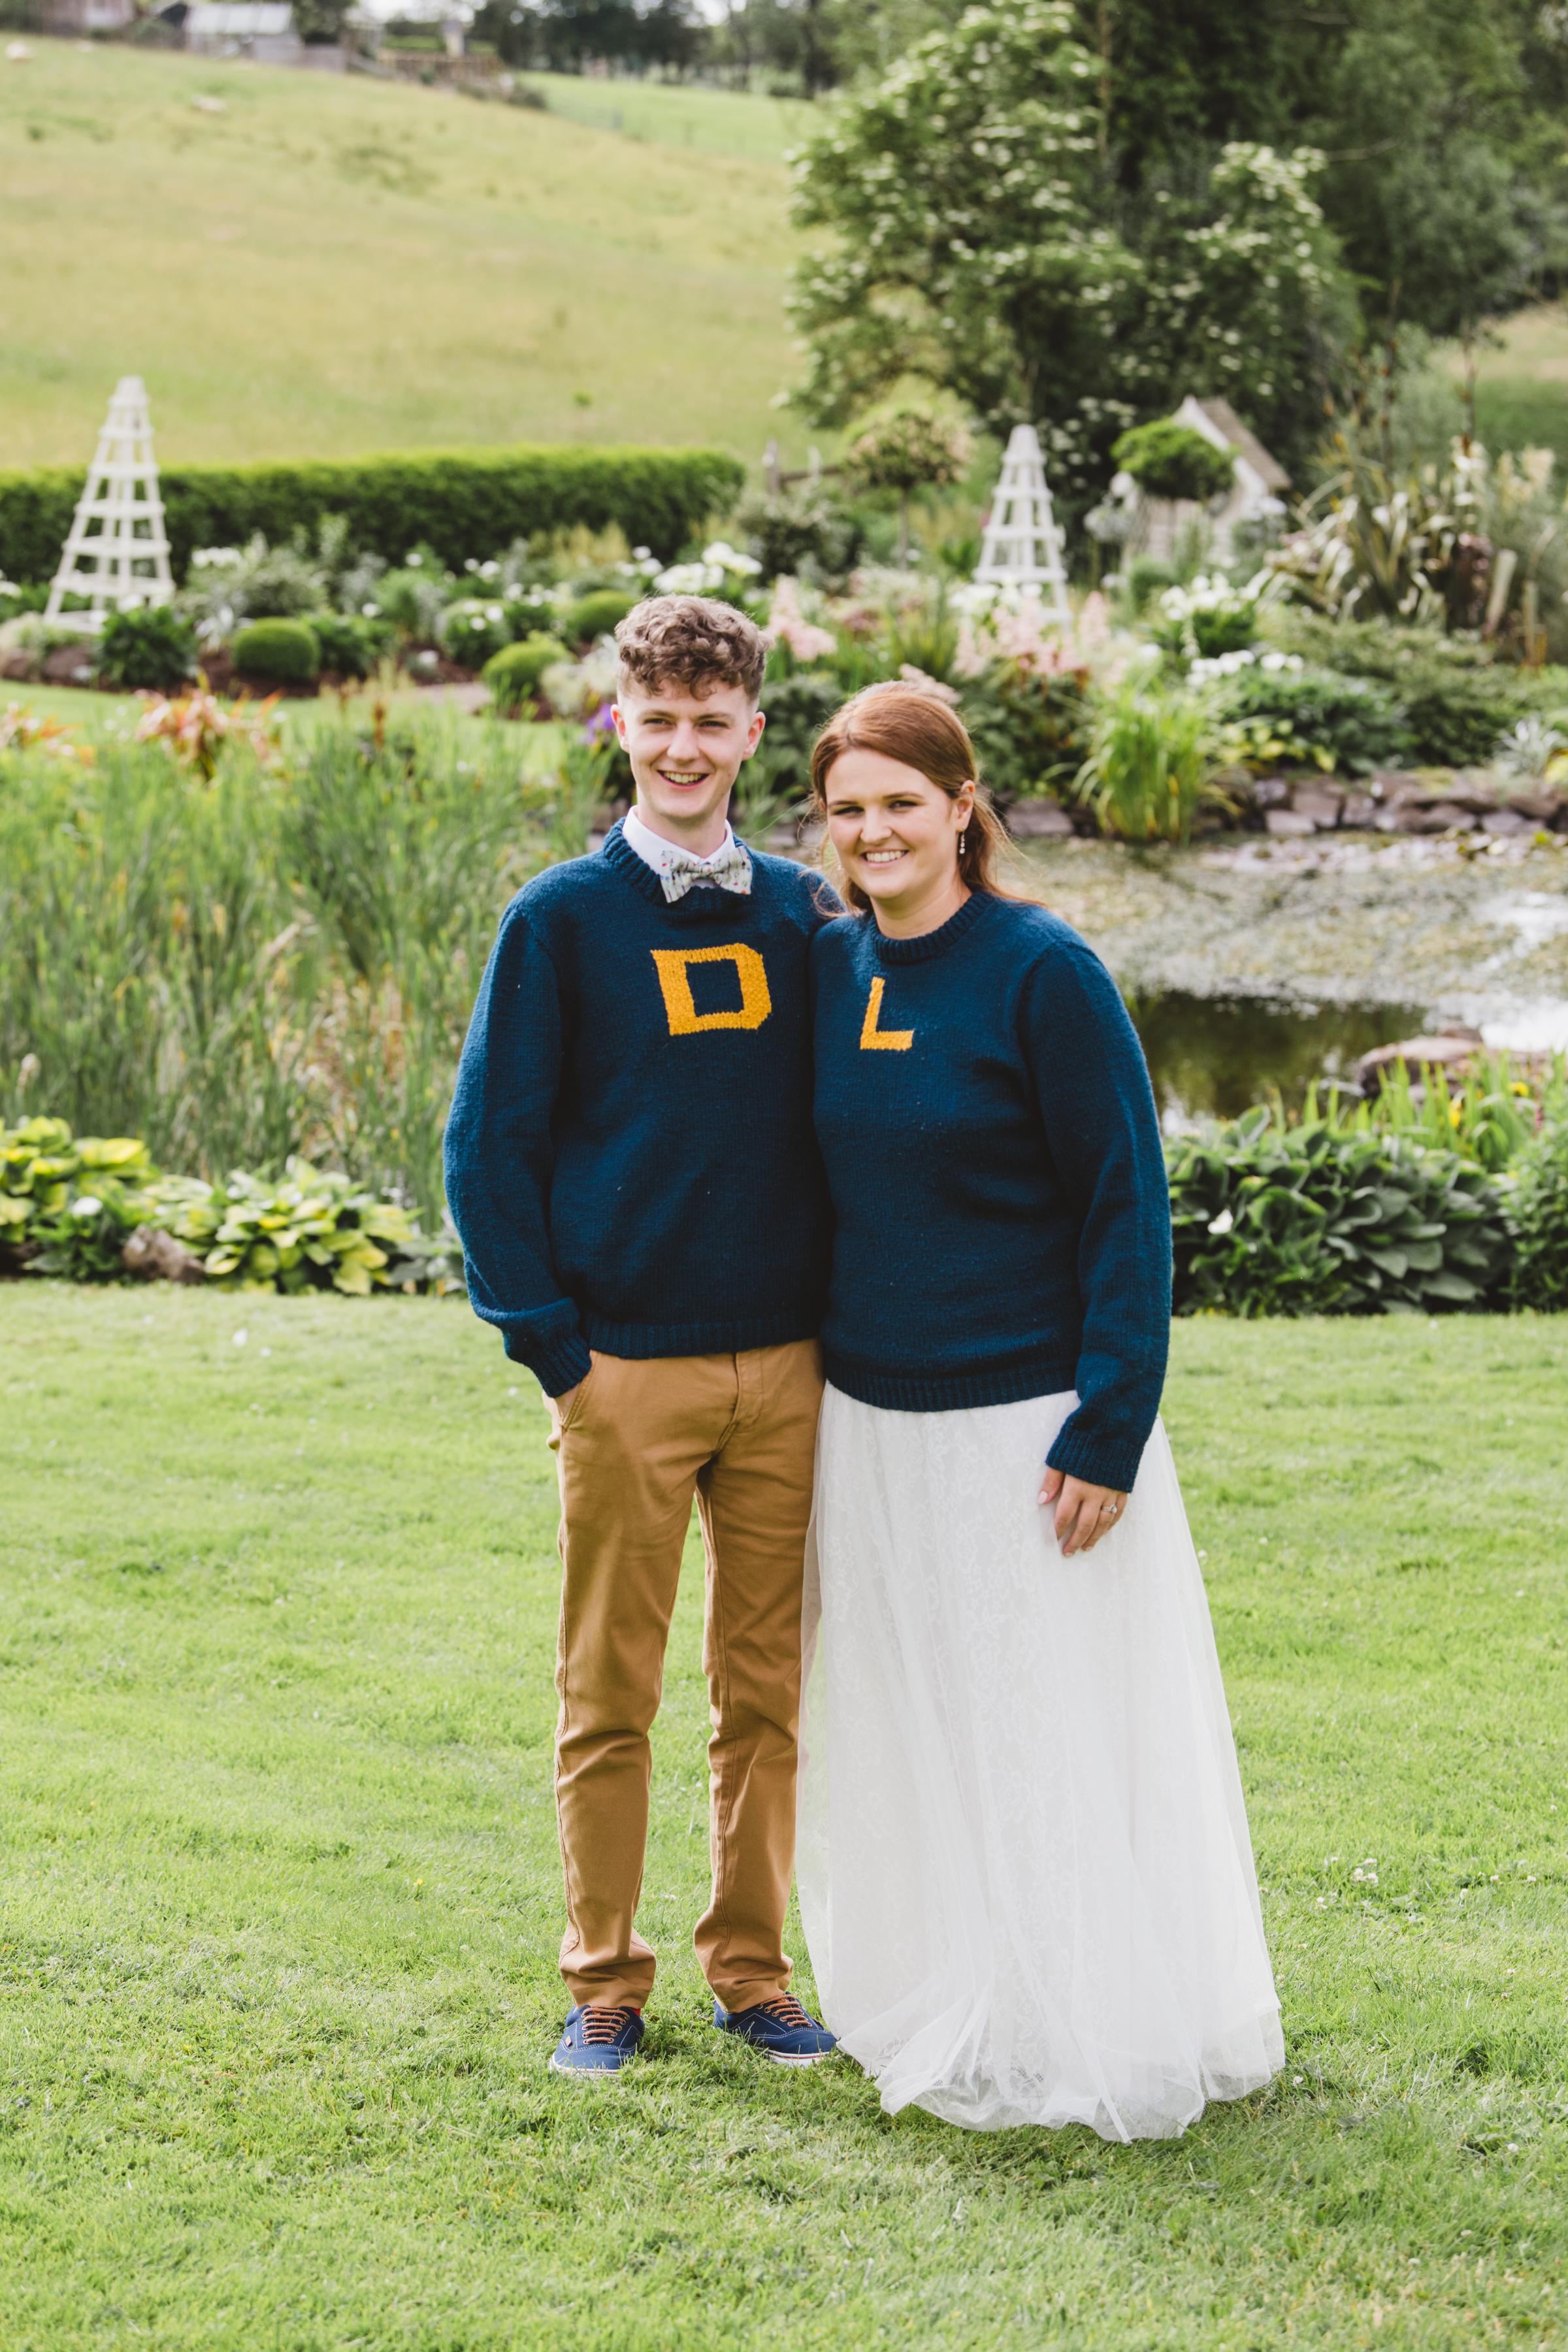 Daniel and Lesa in their Mrs. Weasley jumpers.